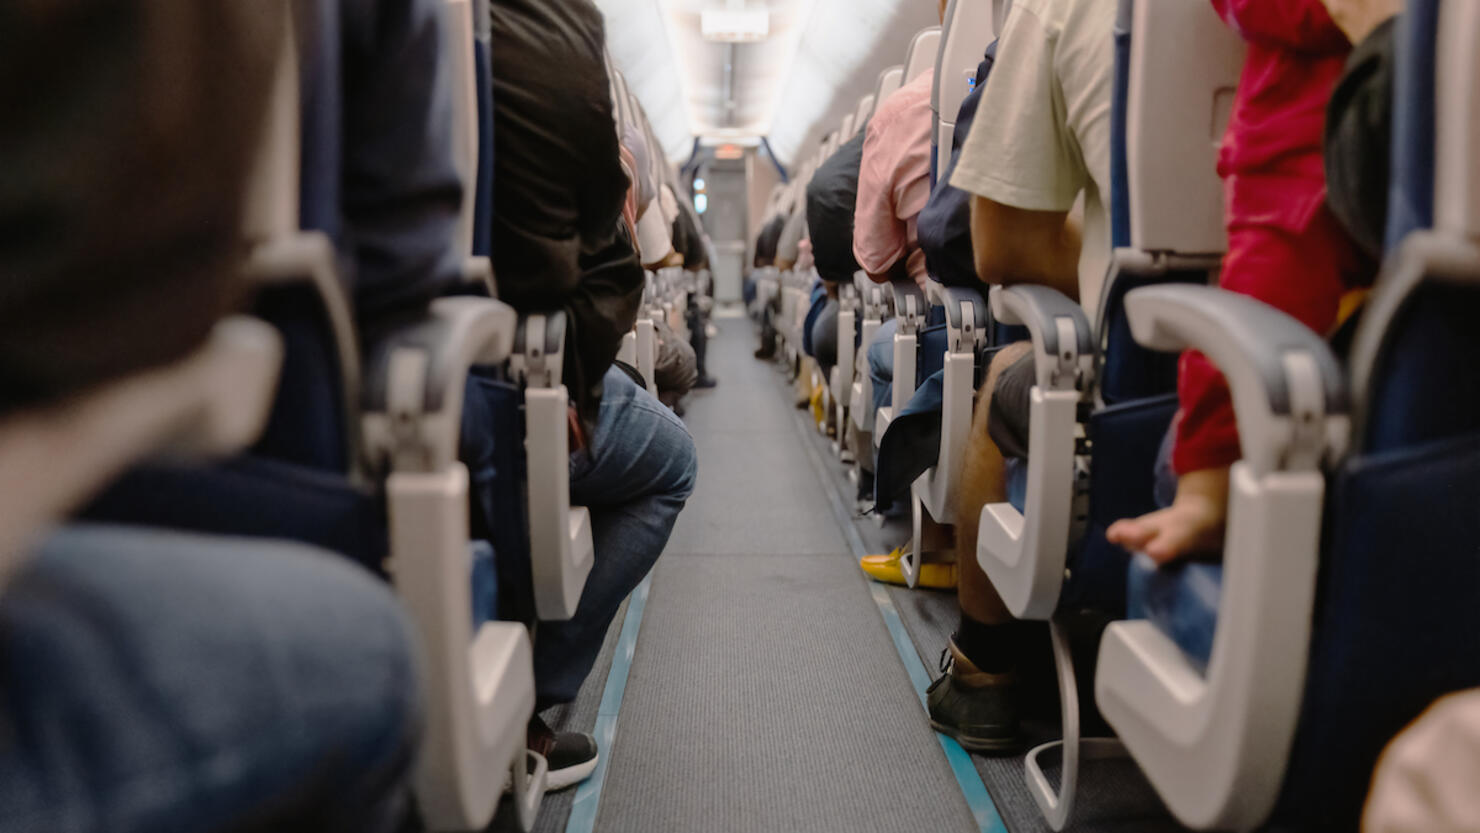 Airplane Aisle with View Of People Sitting on Their Seats